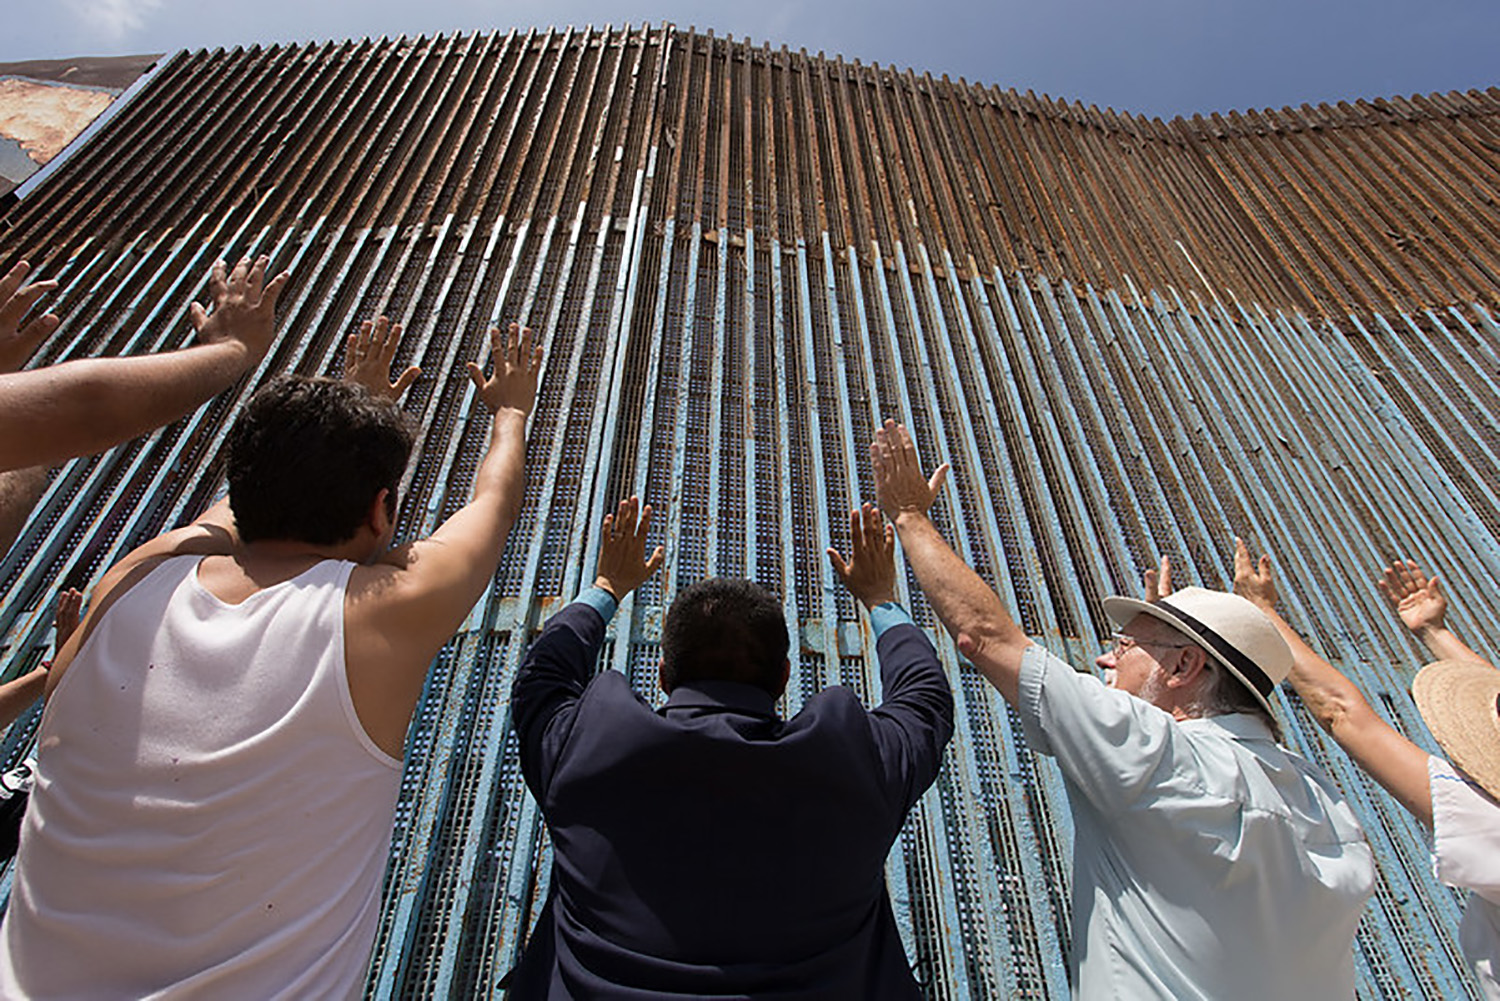 The Revs. Joel Hortiales (center, in blue blazer) and David Farley (to Hortiales' right) join parishioners of the Border Church in Tijuana, Mexico, as they lift their arms skyward beneath the fence that marks the border with the U.S. Photo by Mike DuBose, UM News.